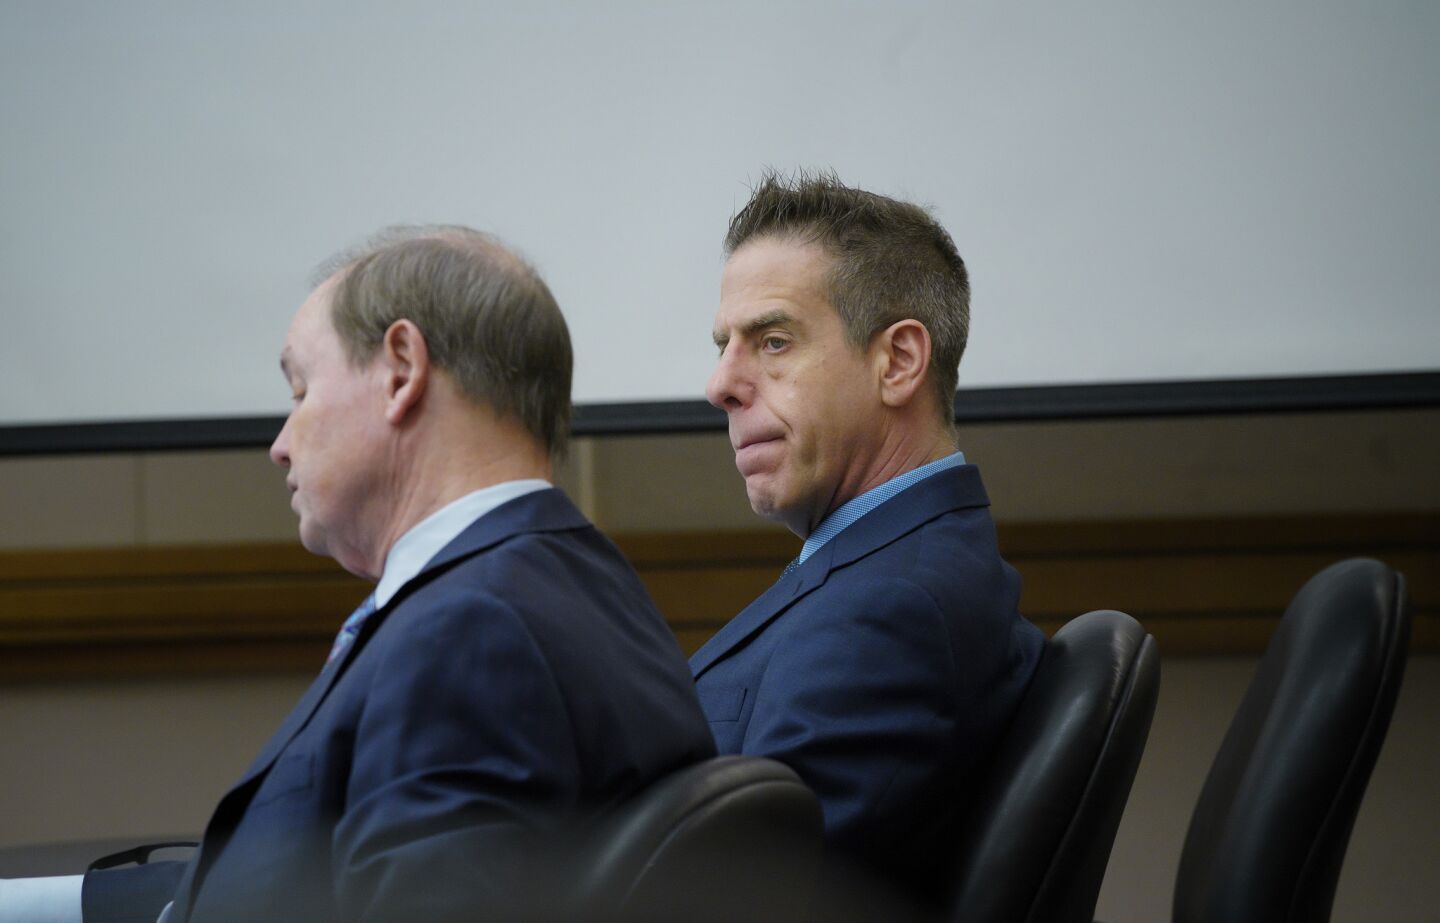 Adam Shacknai (right) sits next to his attorney, Dan Webb (left) on day-six in the civil trial for the wrongful death of Rebecca Zahau in San Diego Superior Court.